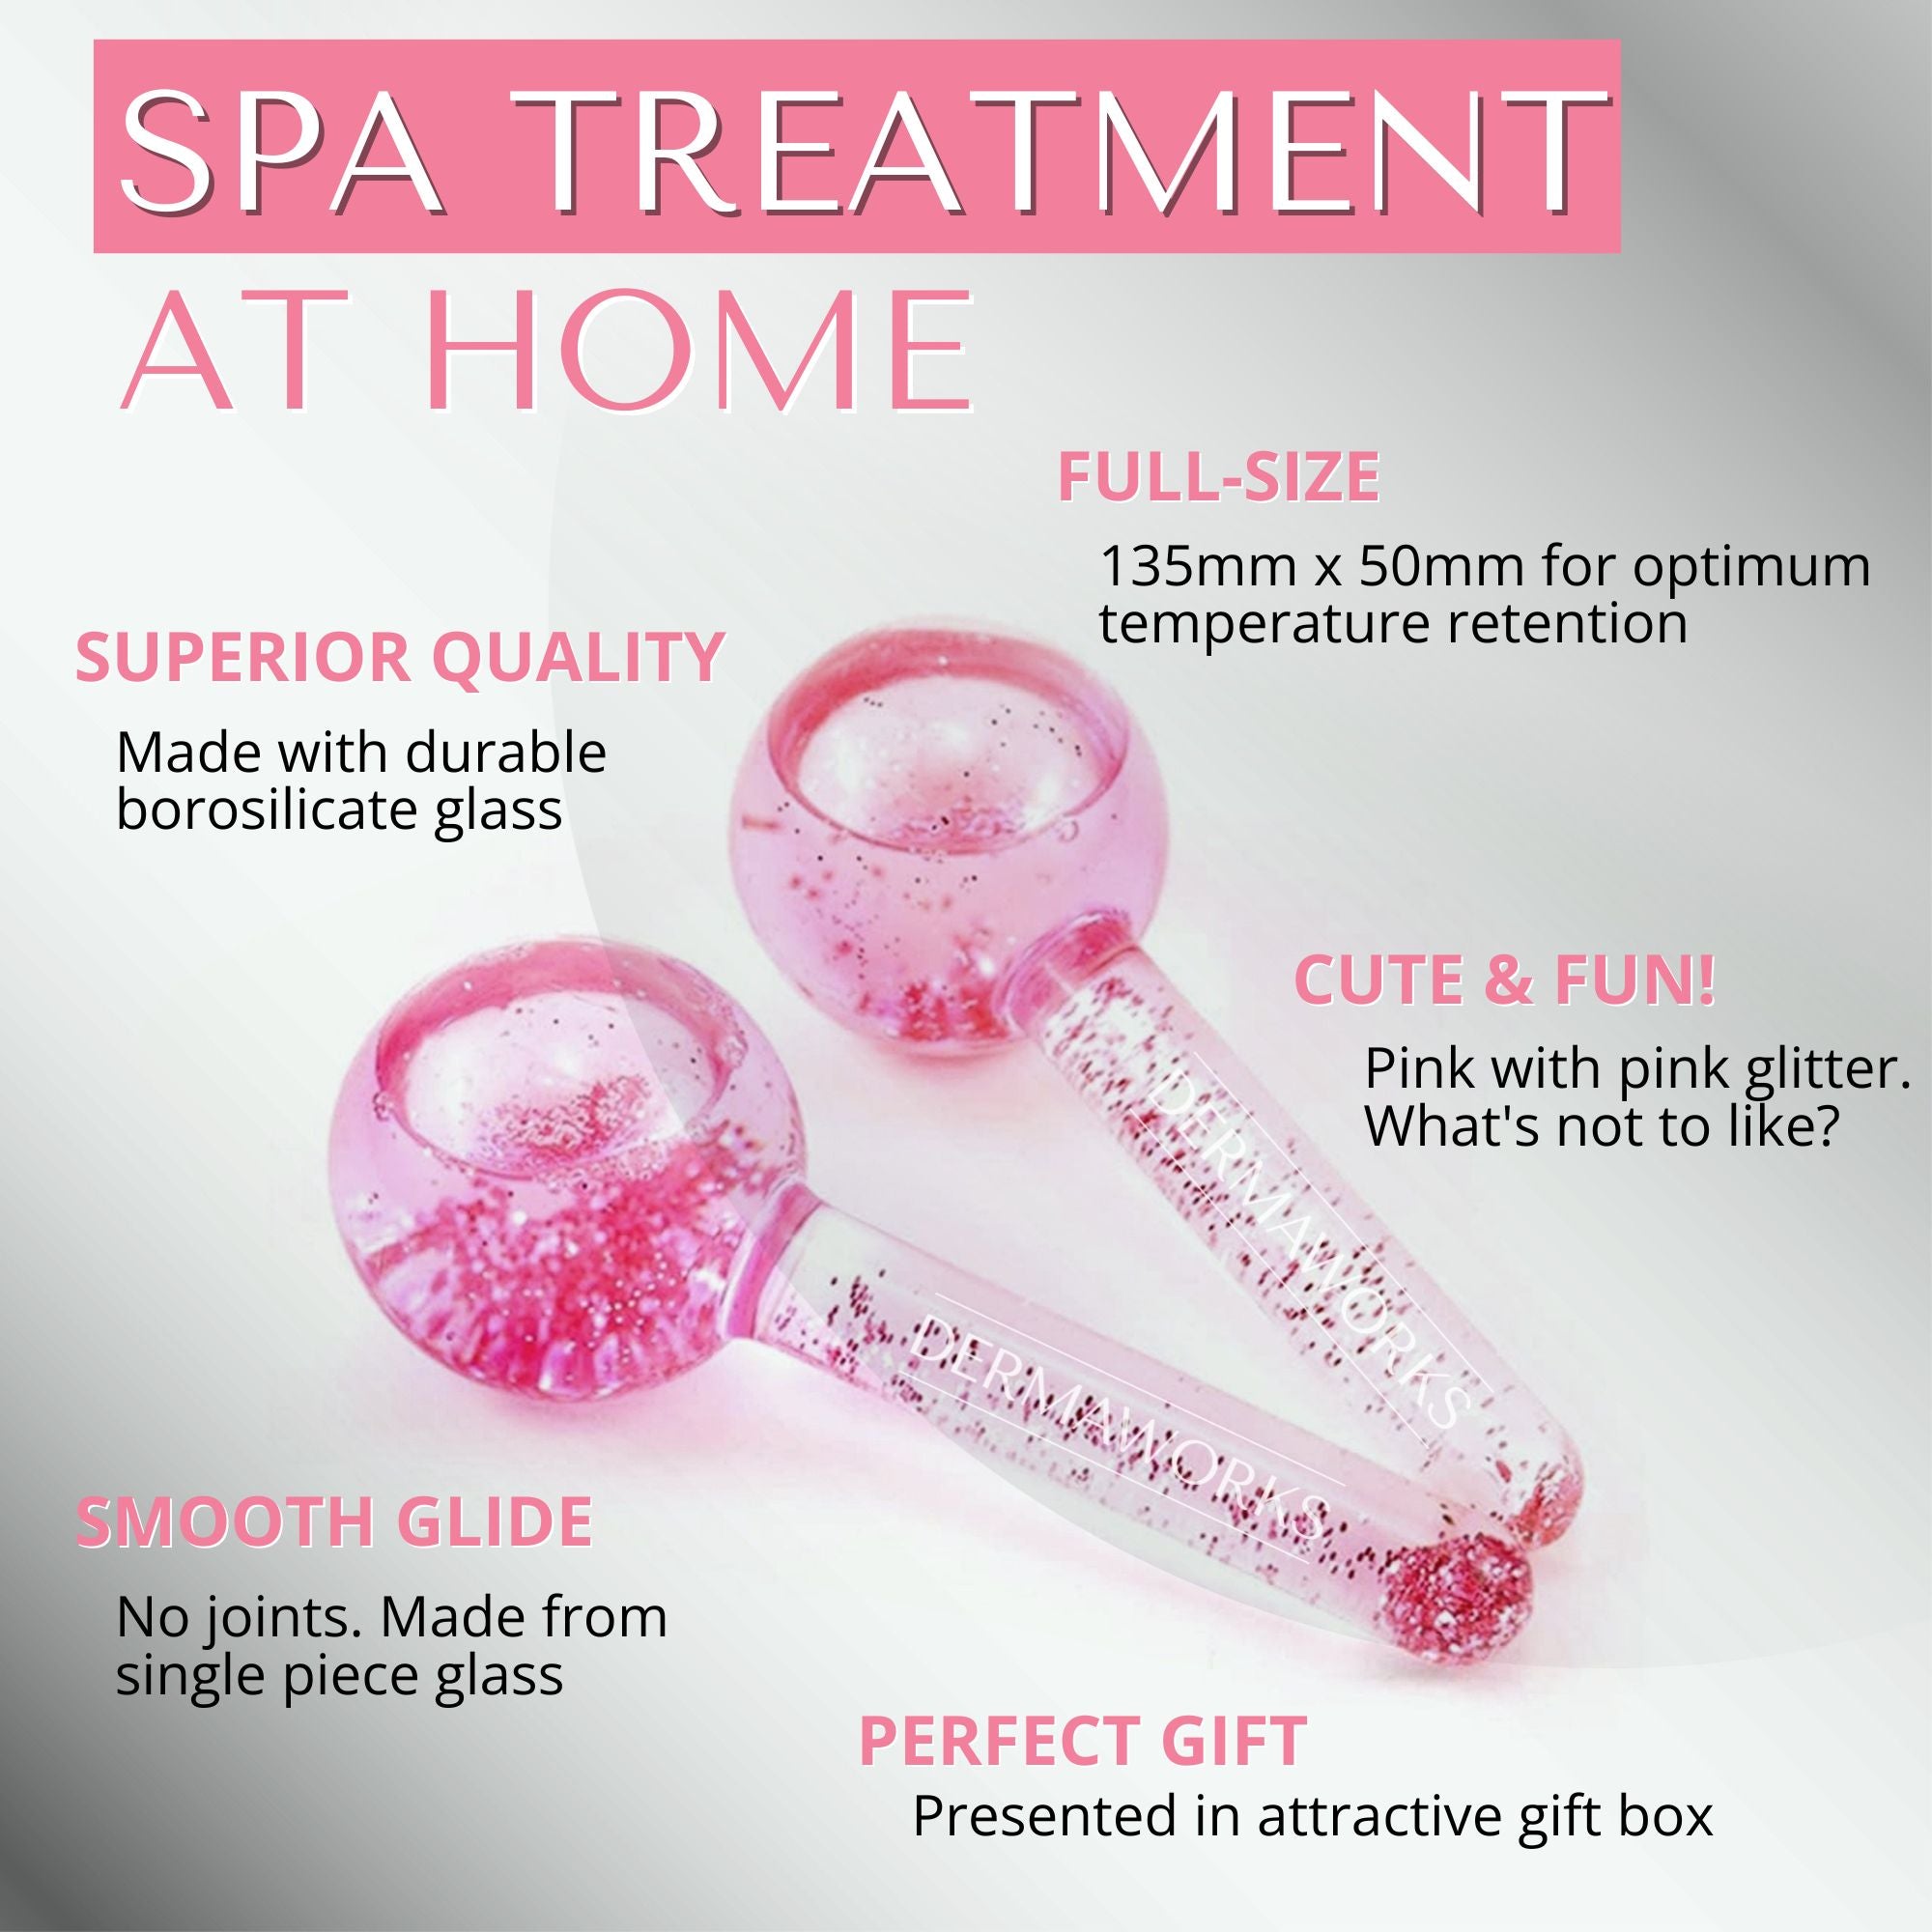 Spa treatment at home with superior quality, full size pink and glittery ice globes for face. An ideal gift for her in a smart presentation box.